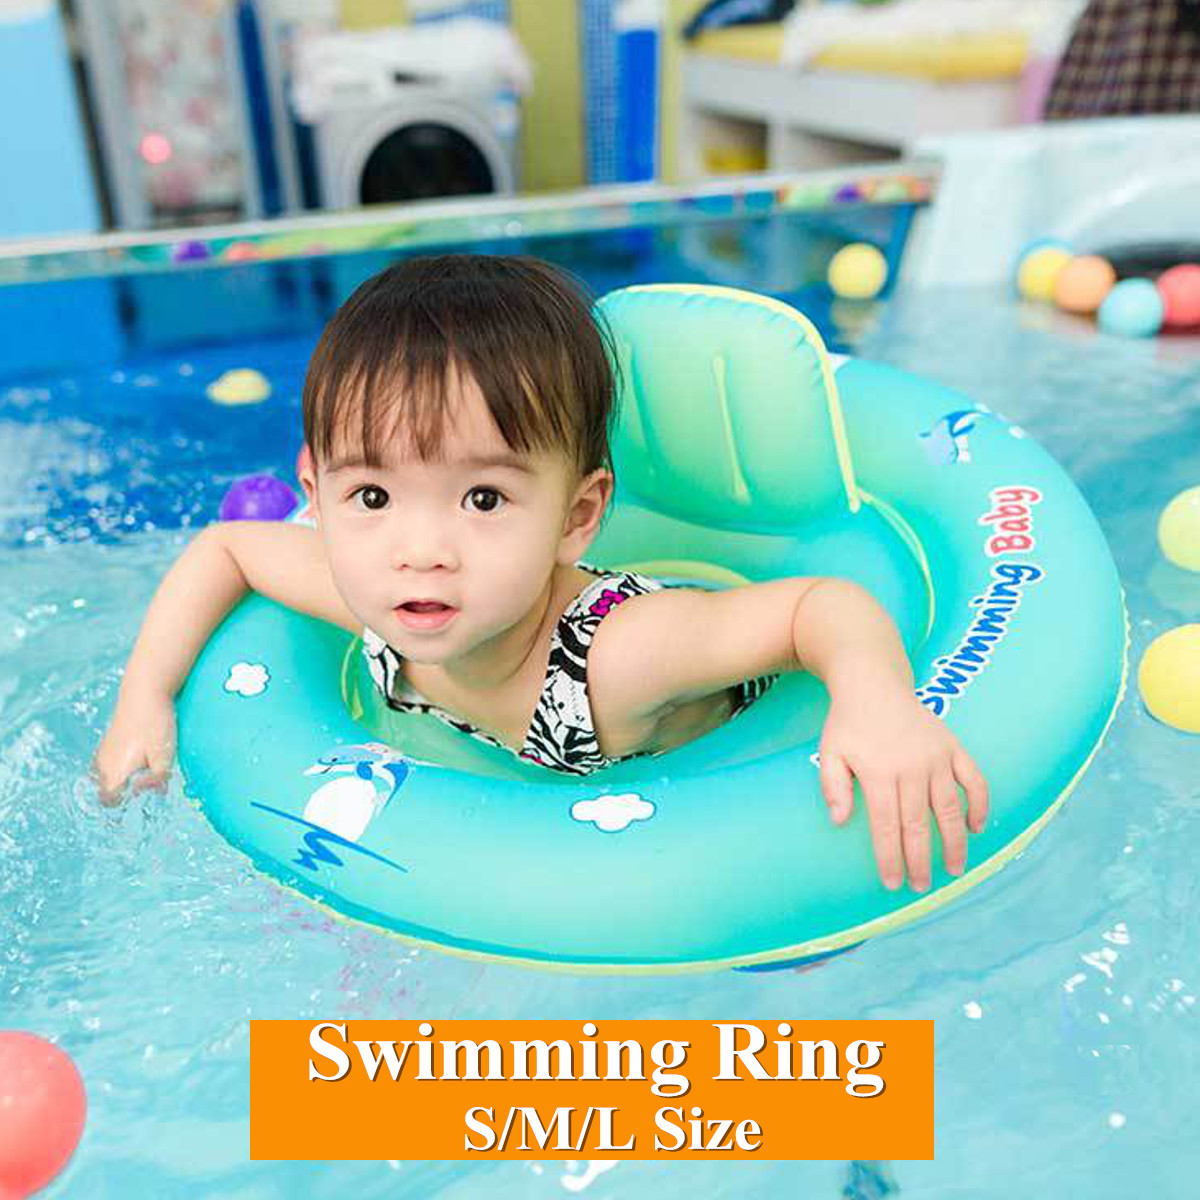 Baby-Float-Swimming-Ring-Kid-Inflatable-Beach-Tube-Pool-Water-Fun-Toy-SML-1293907